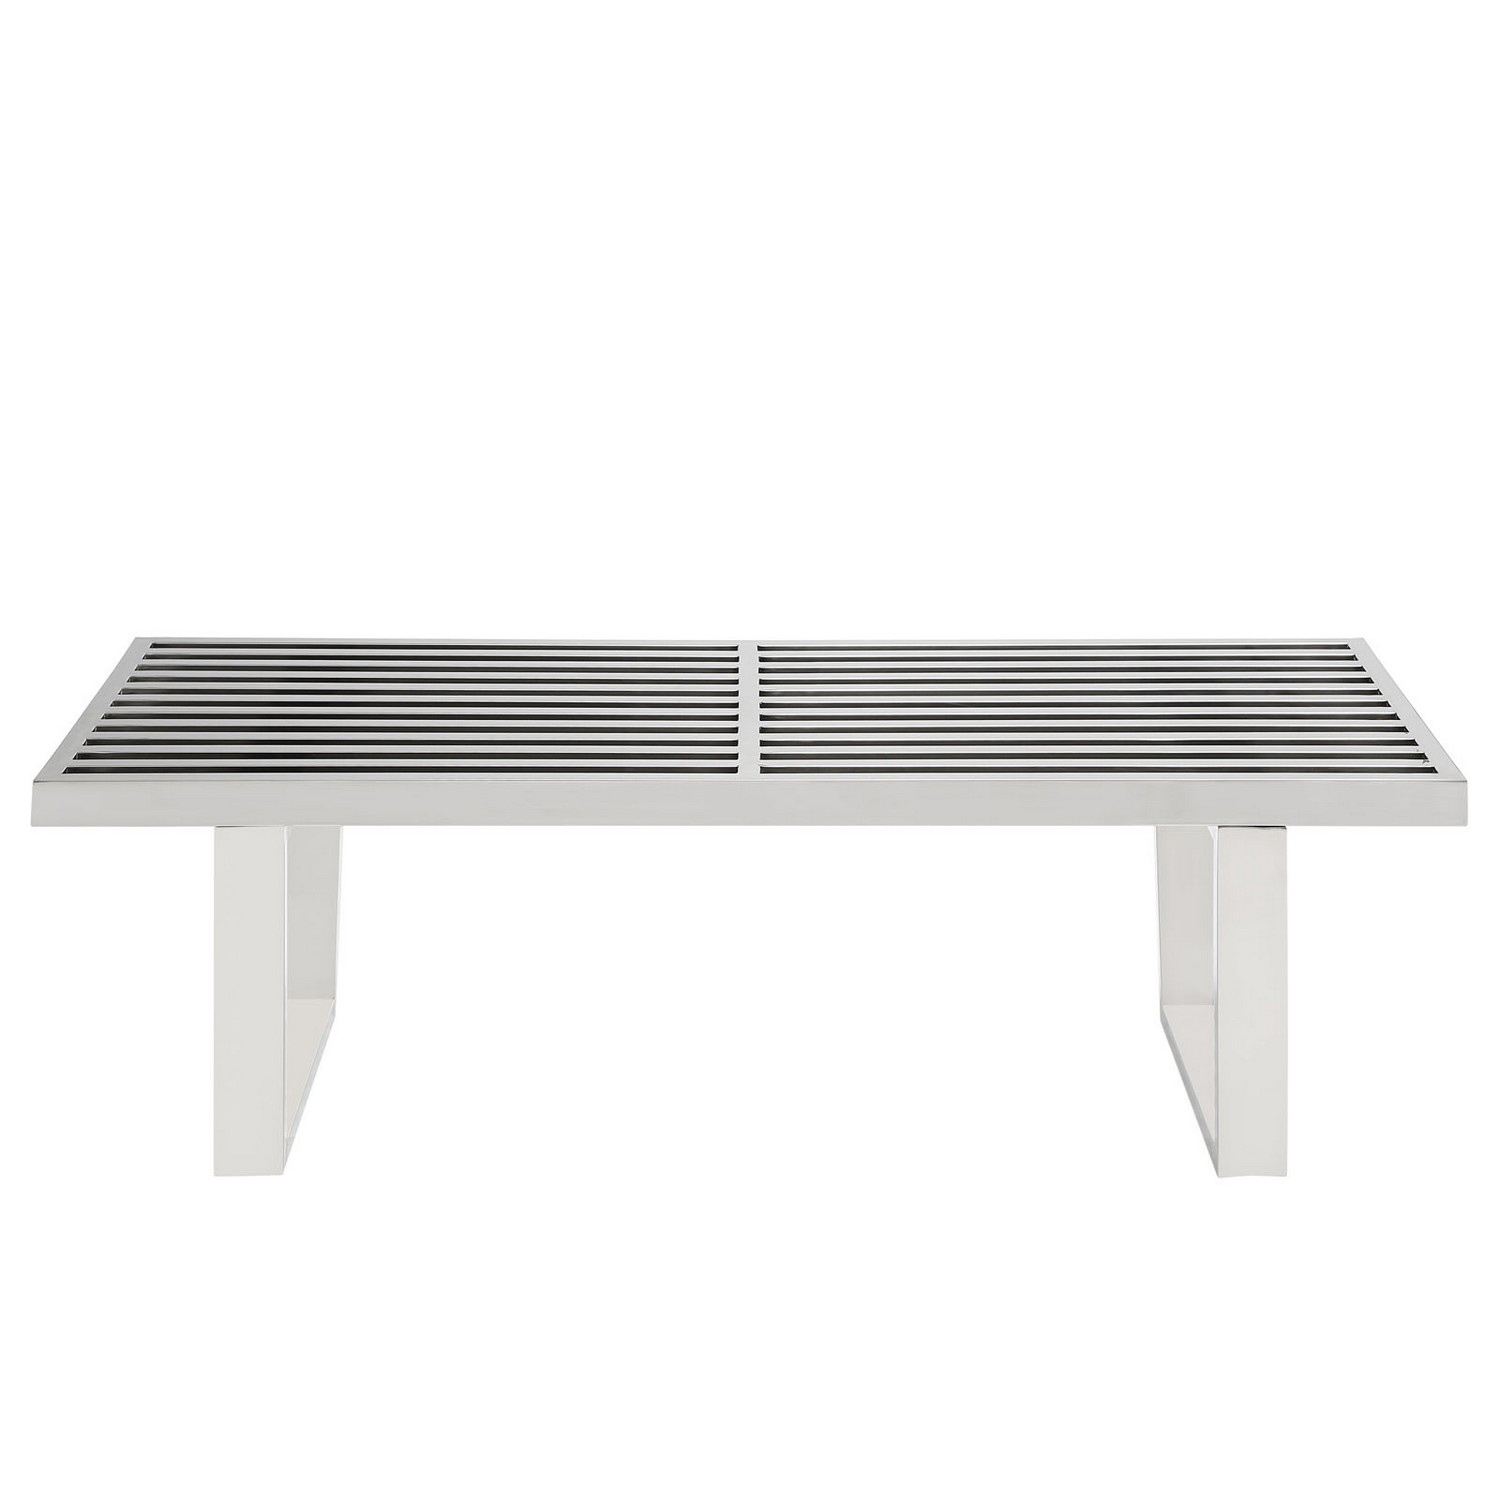 Modway Sauna 4 Foot Stainless Steel Bench - Silver